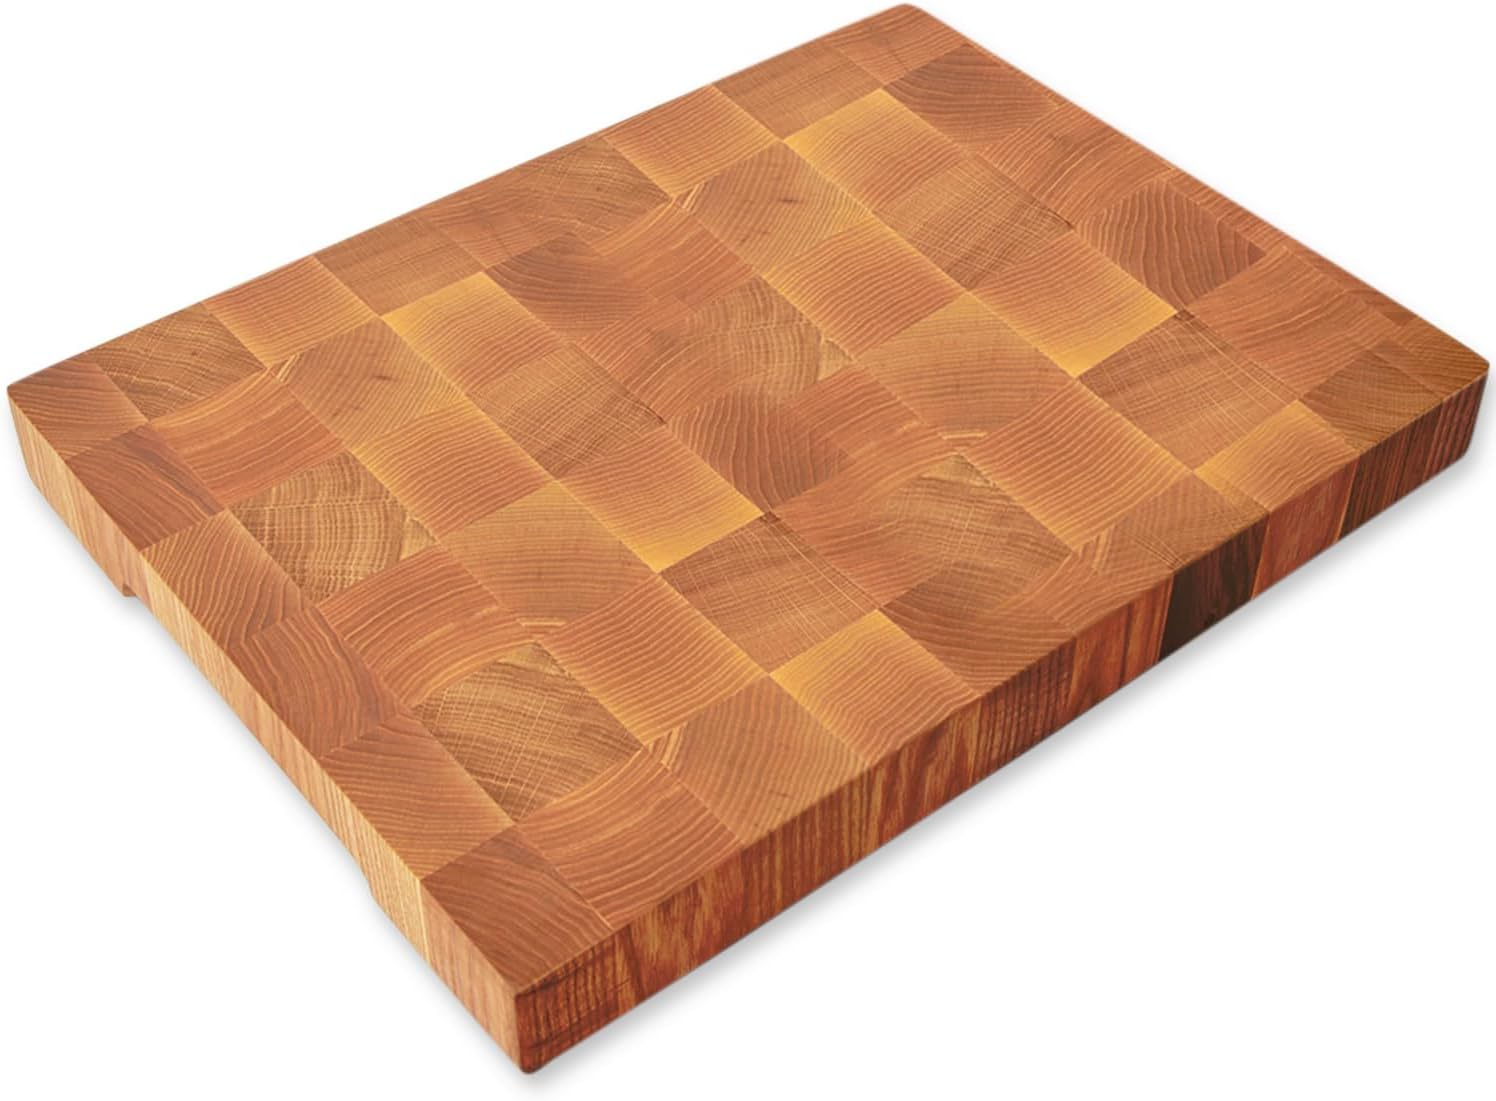 Wooden Cutting Board for Kitchen (16 x 12 Inches) - Kitchen Essentials for Cooking - Large Cutting Board